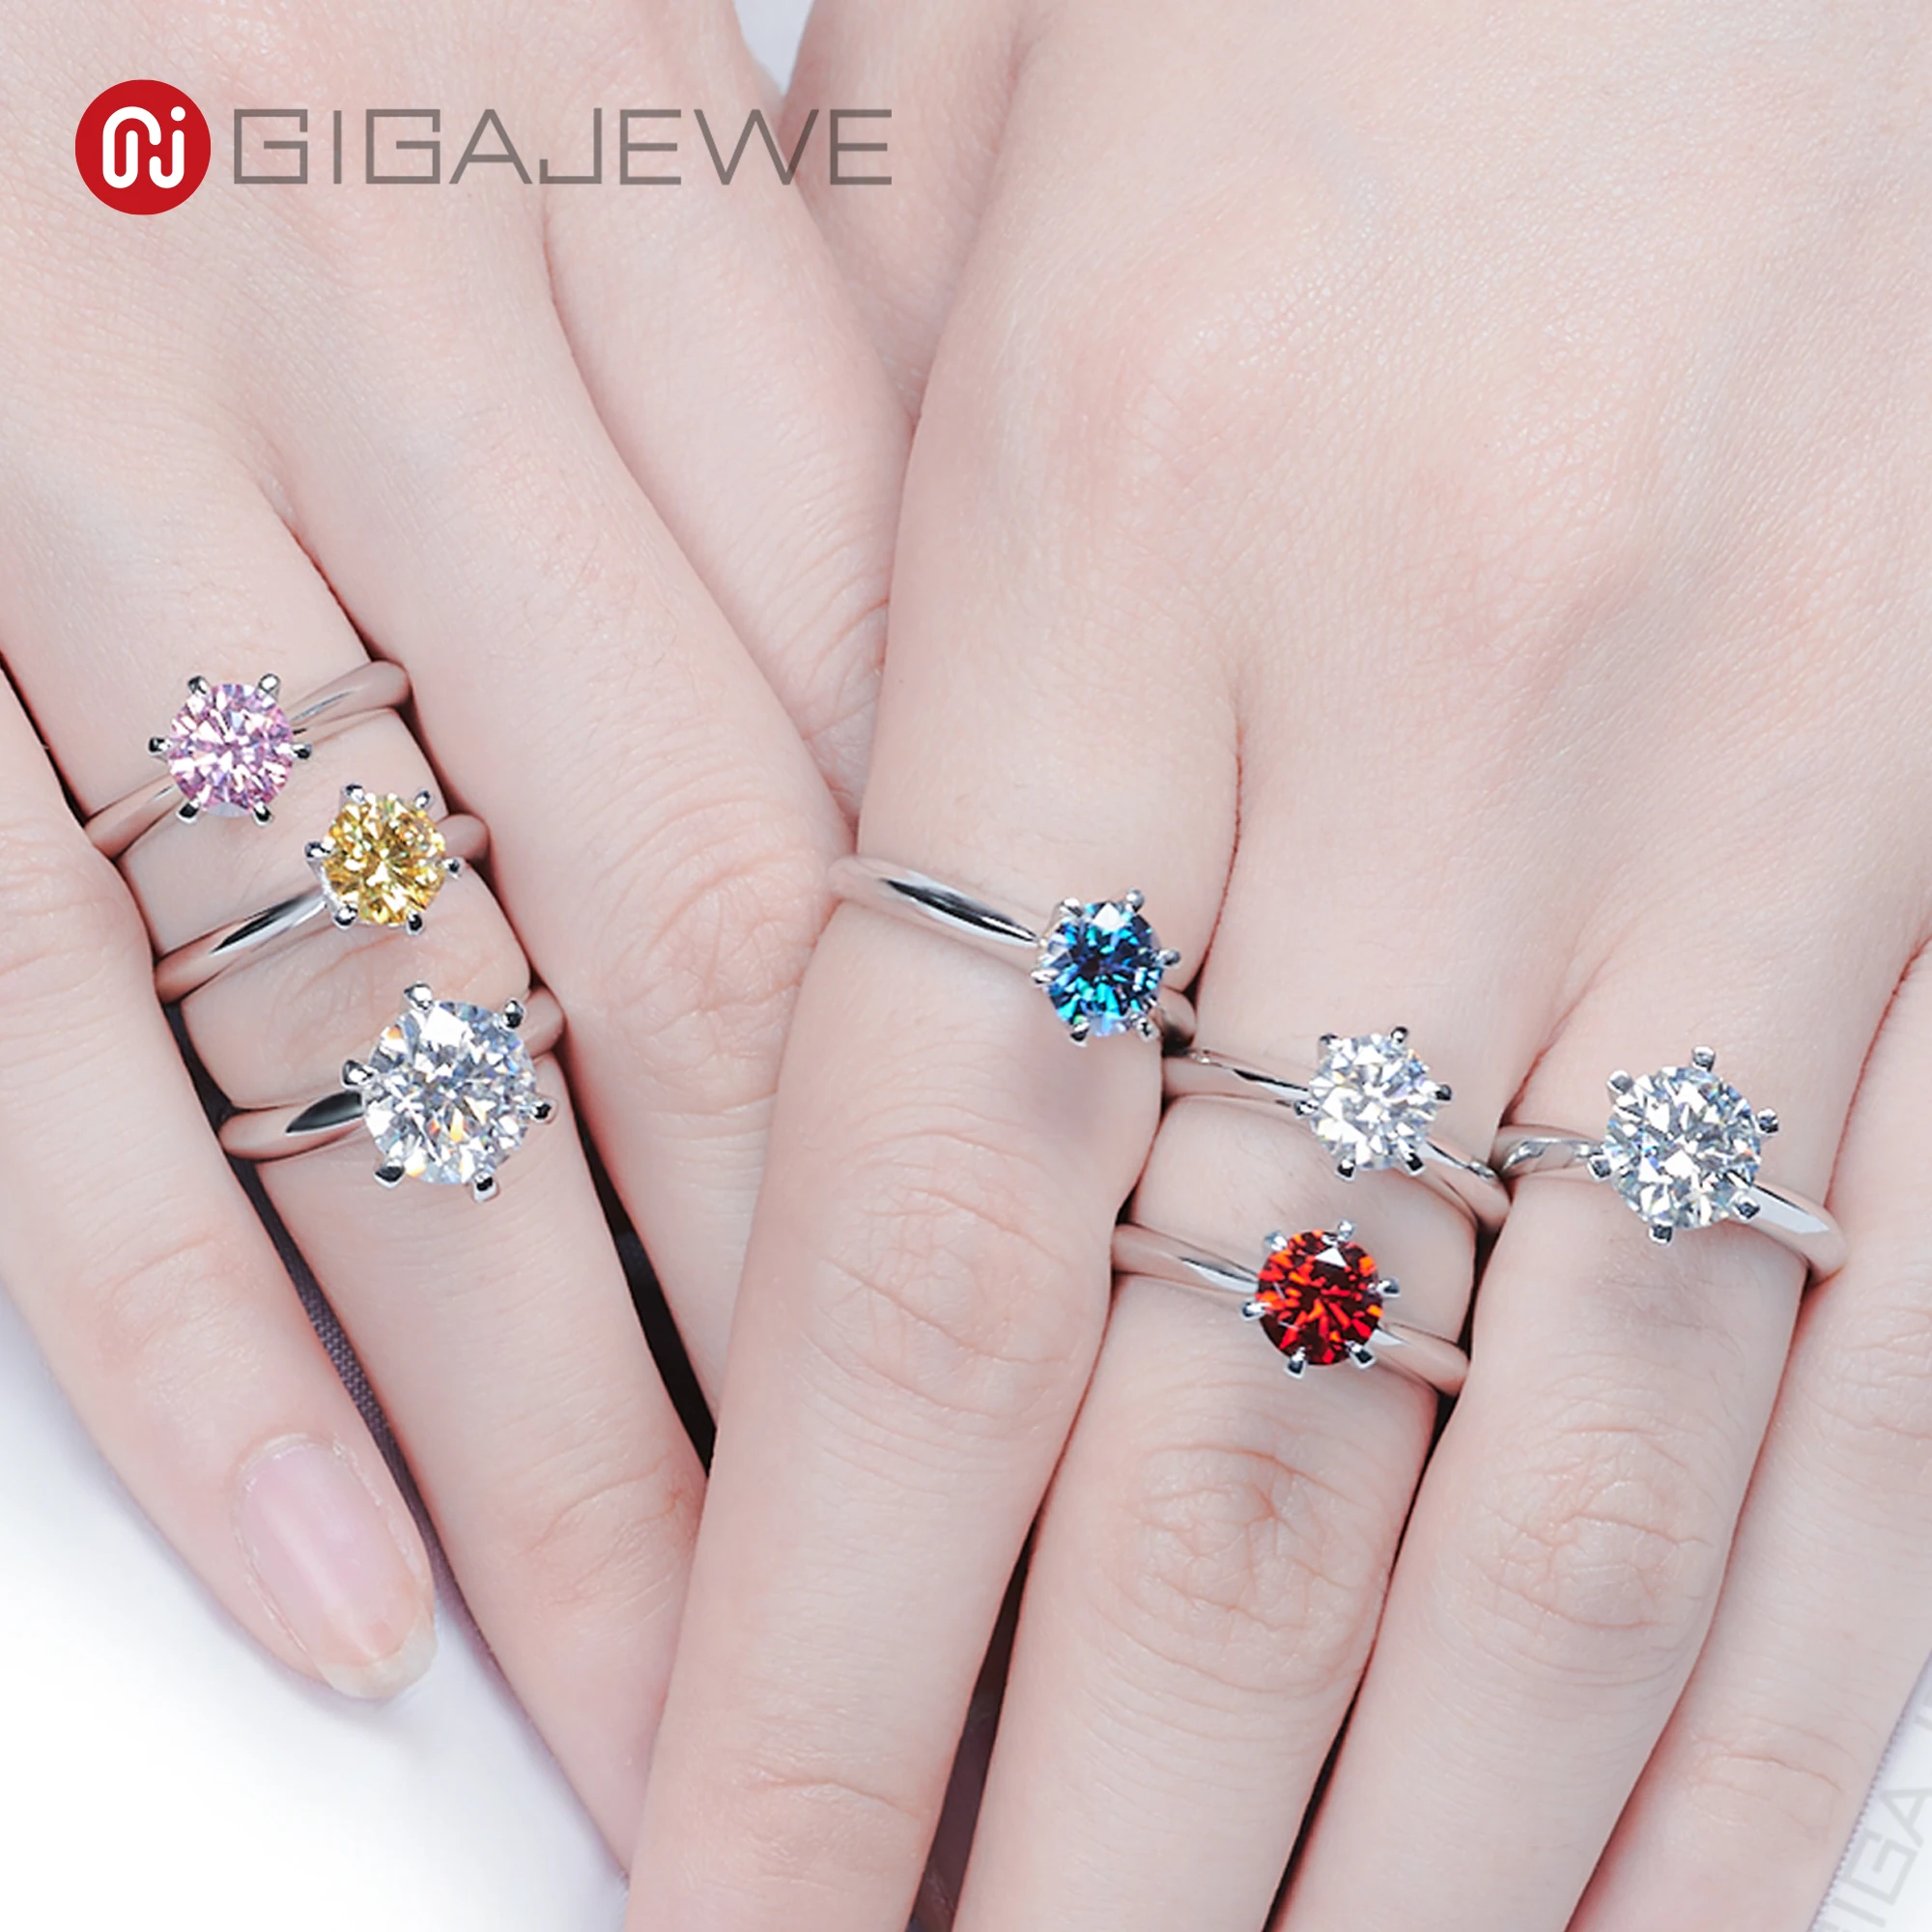 

GIGAJEWE 0.5/1.0/2.0ct EF and nova color VVS1 Round Cut Moissanite 925 Silver Ring six claw setting classic design